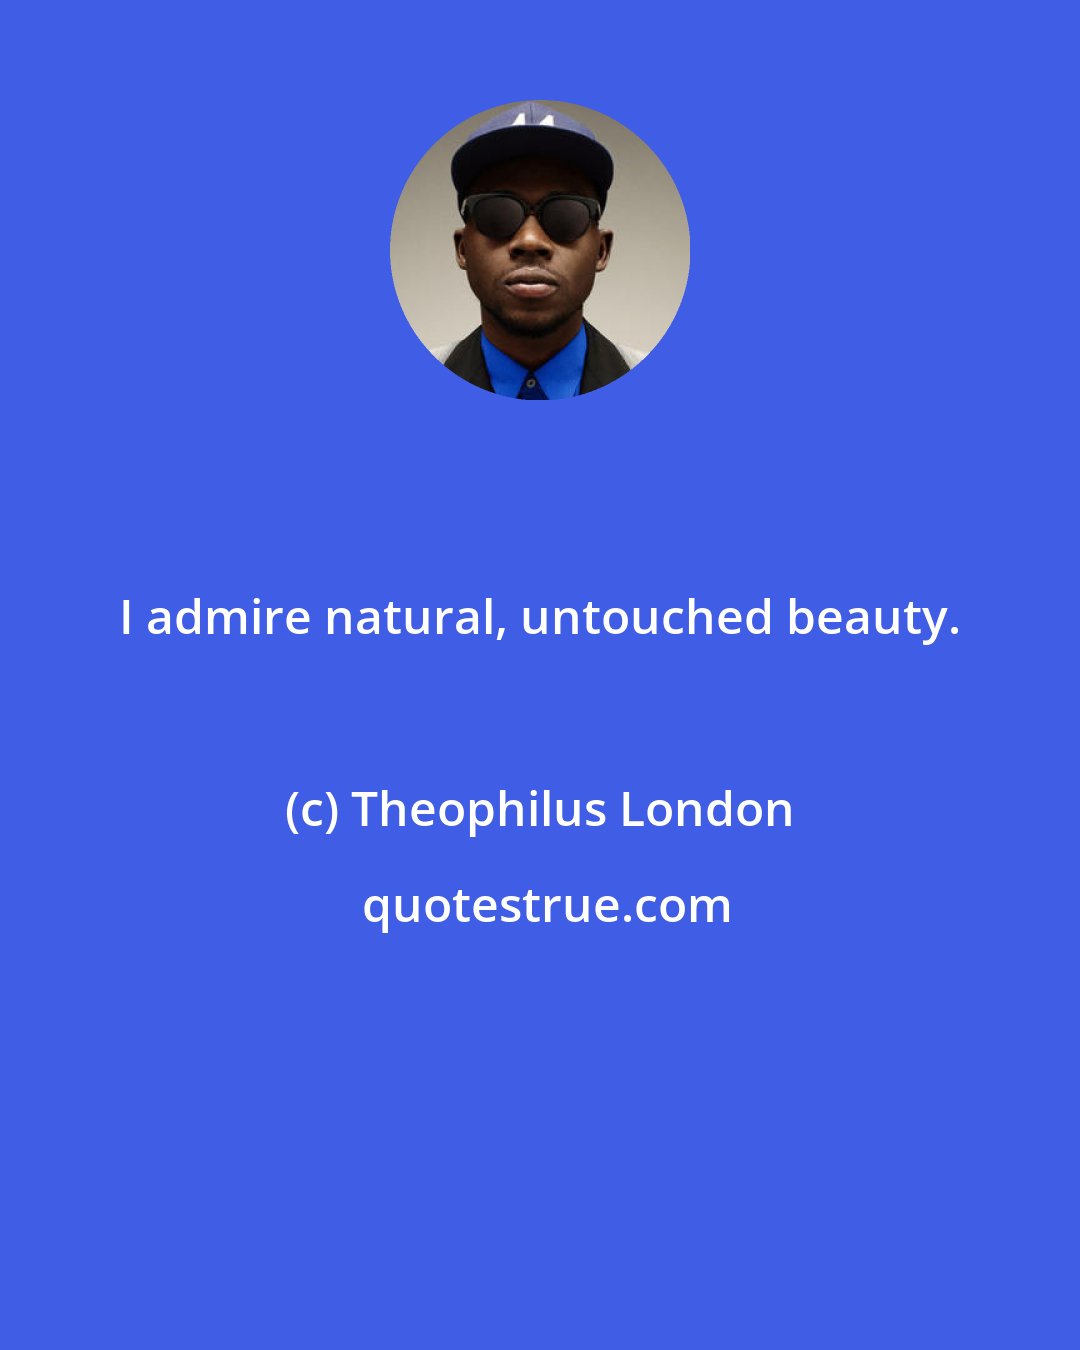 Theophilus London: I admire natural, untouched beauty.